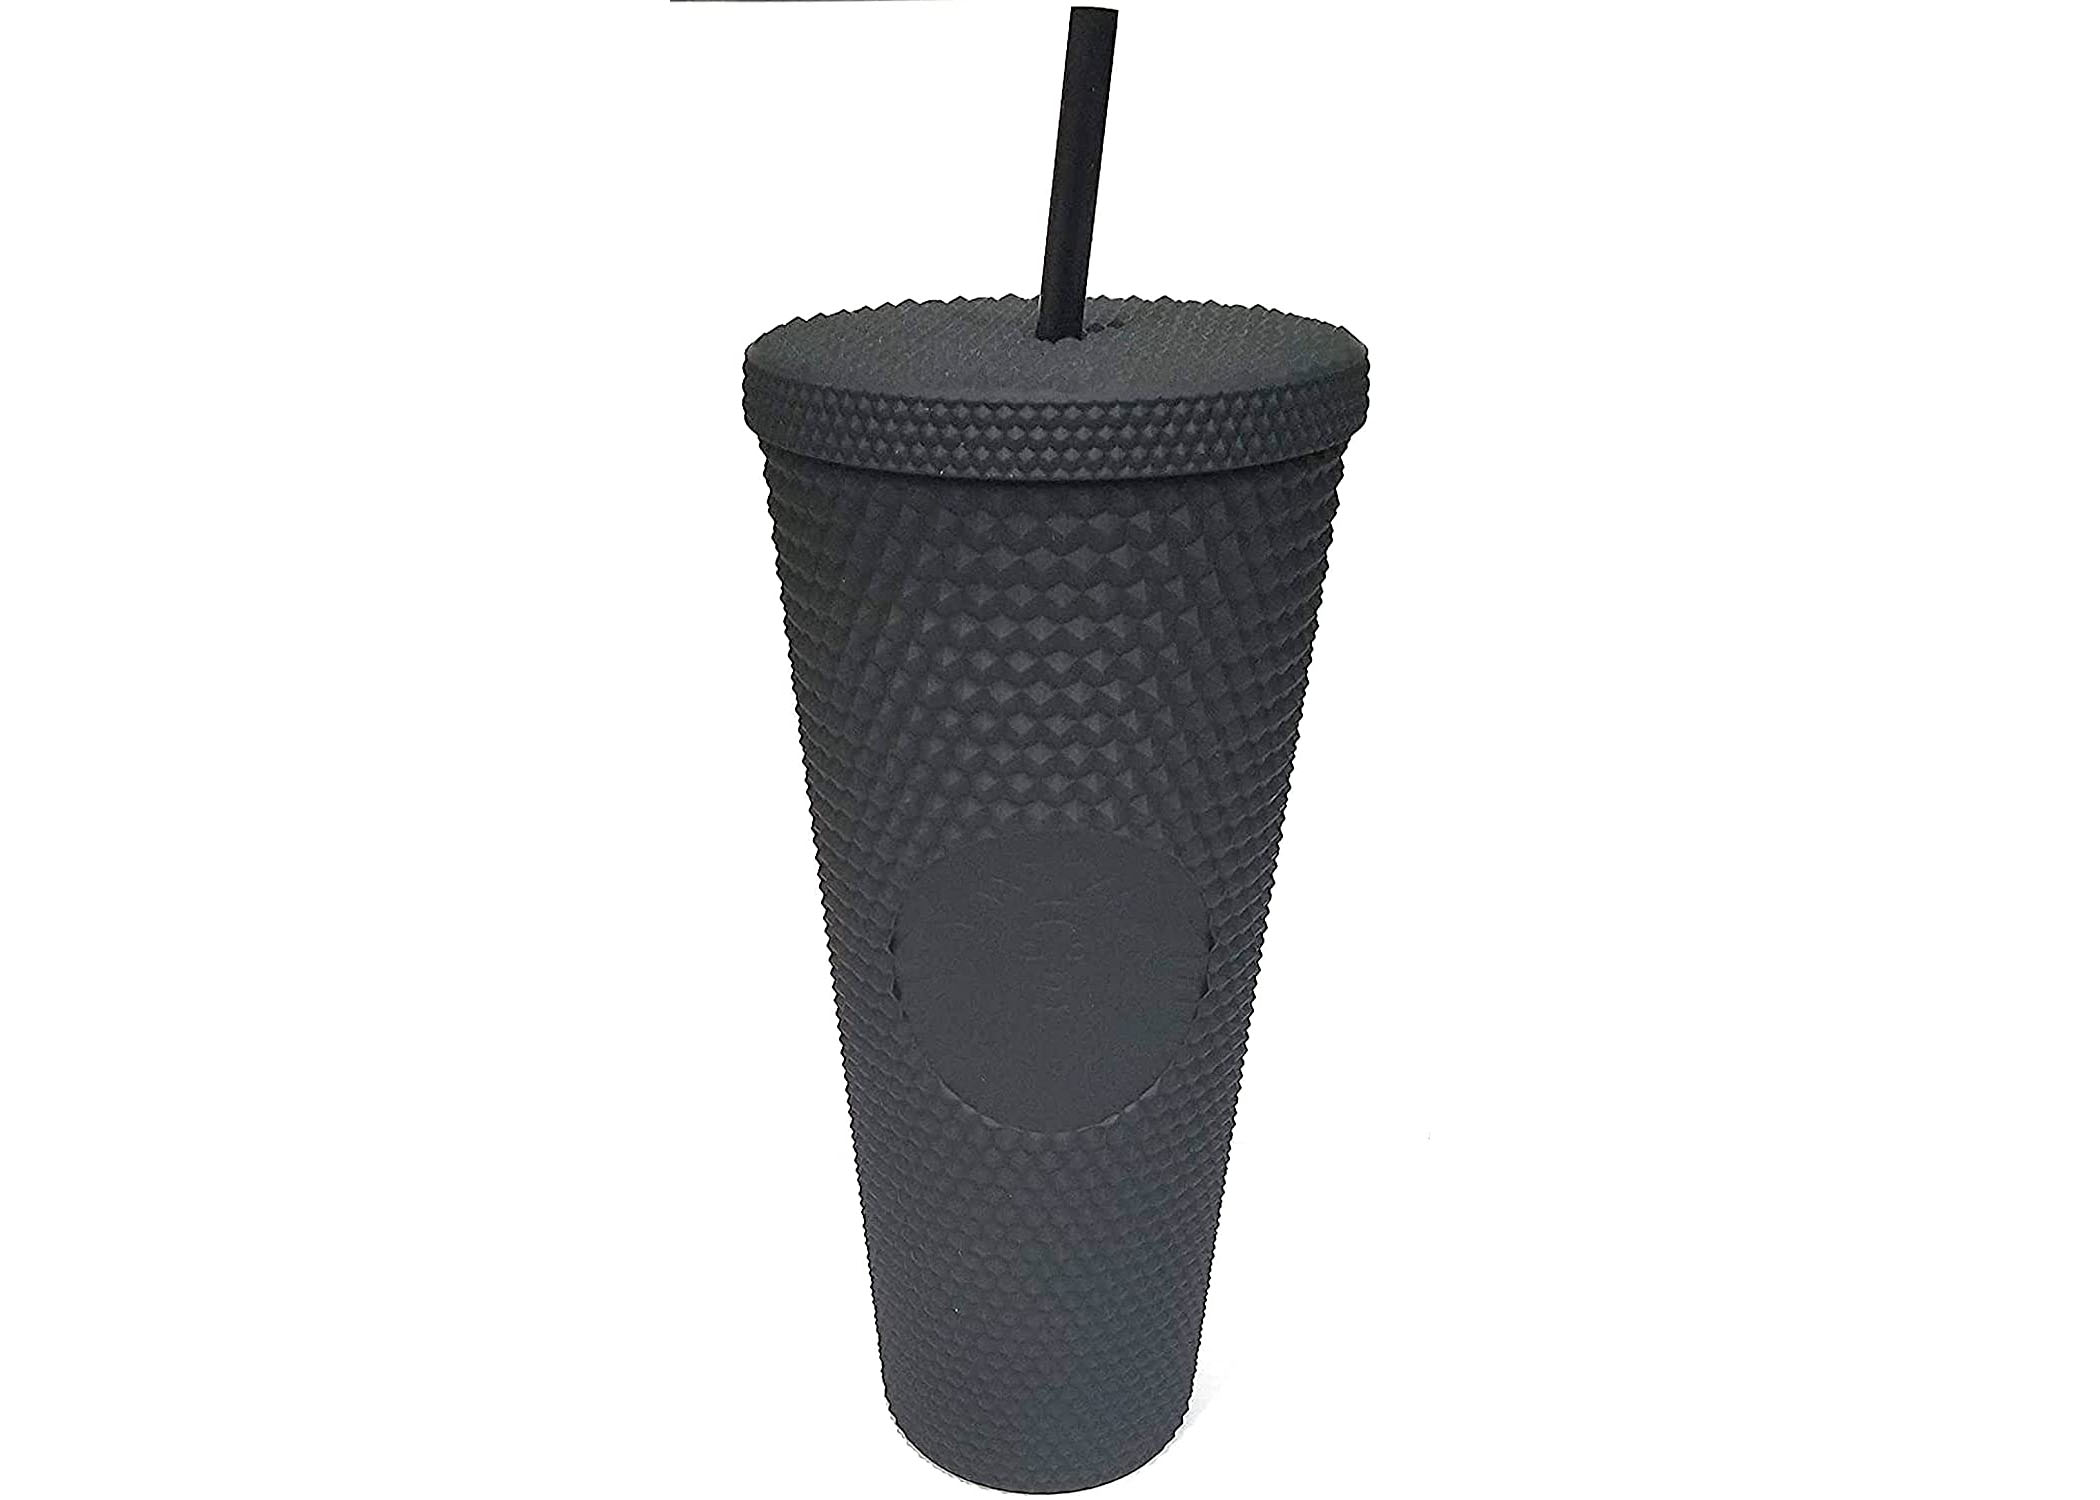 NEW Starbucks LIMITED EDITION 24 oz Matte Black Studded Tumbler Cup ONE DAY SALE 